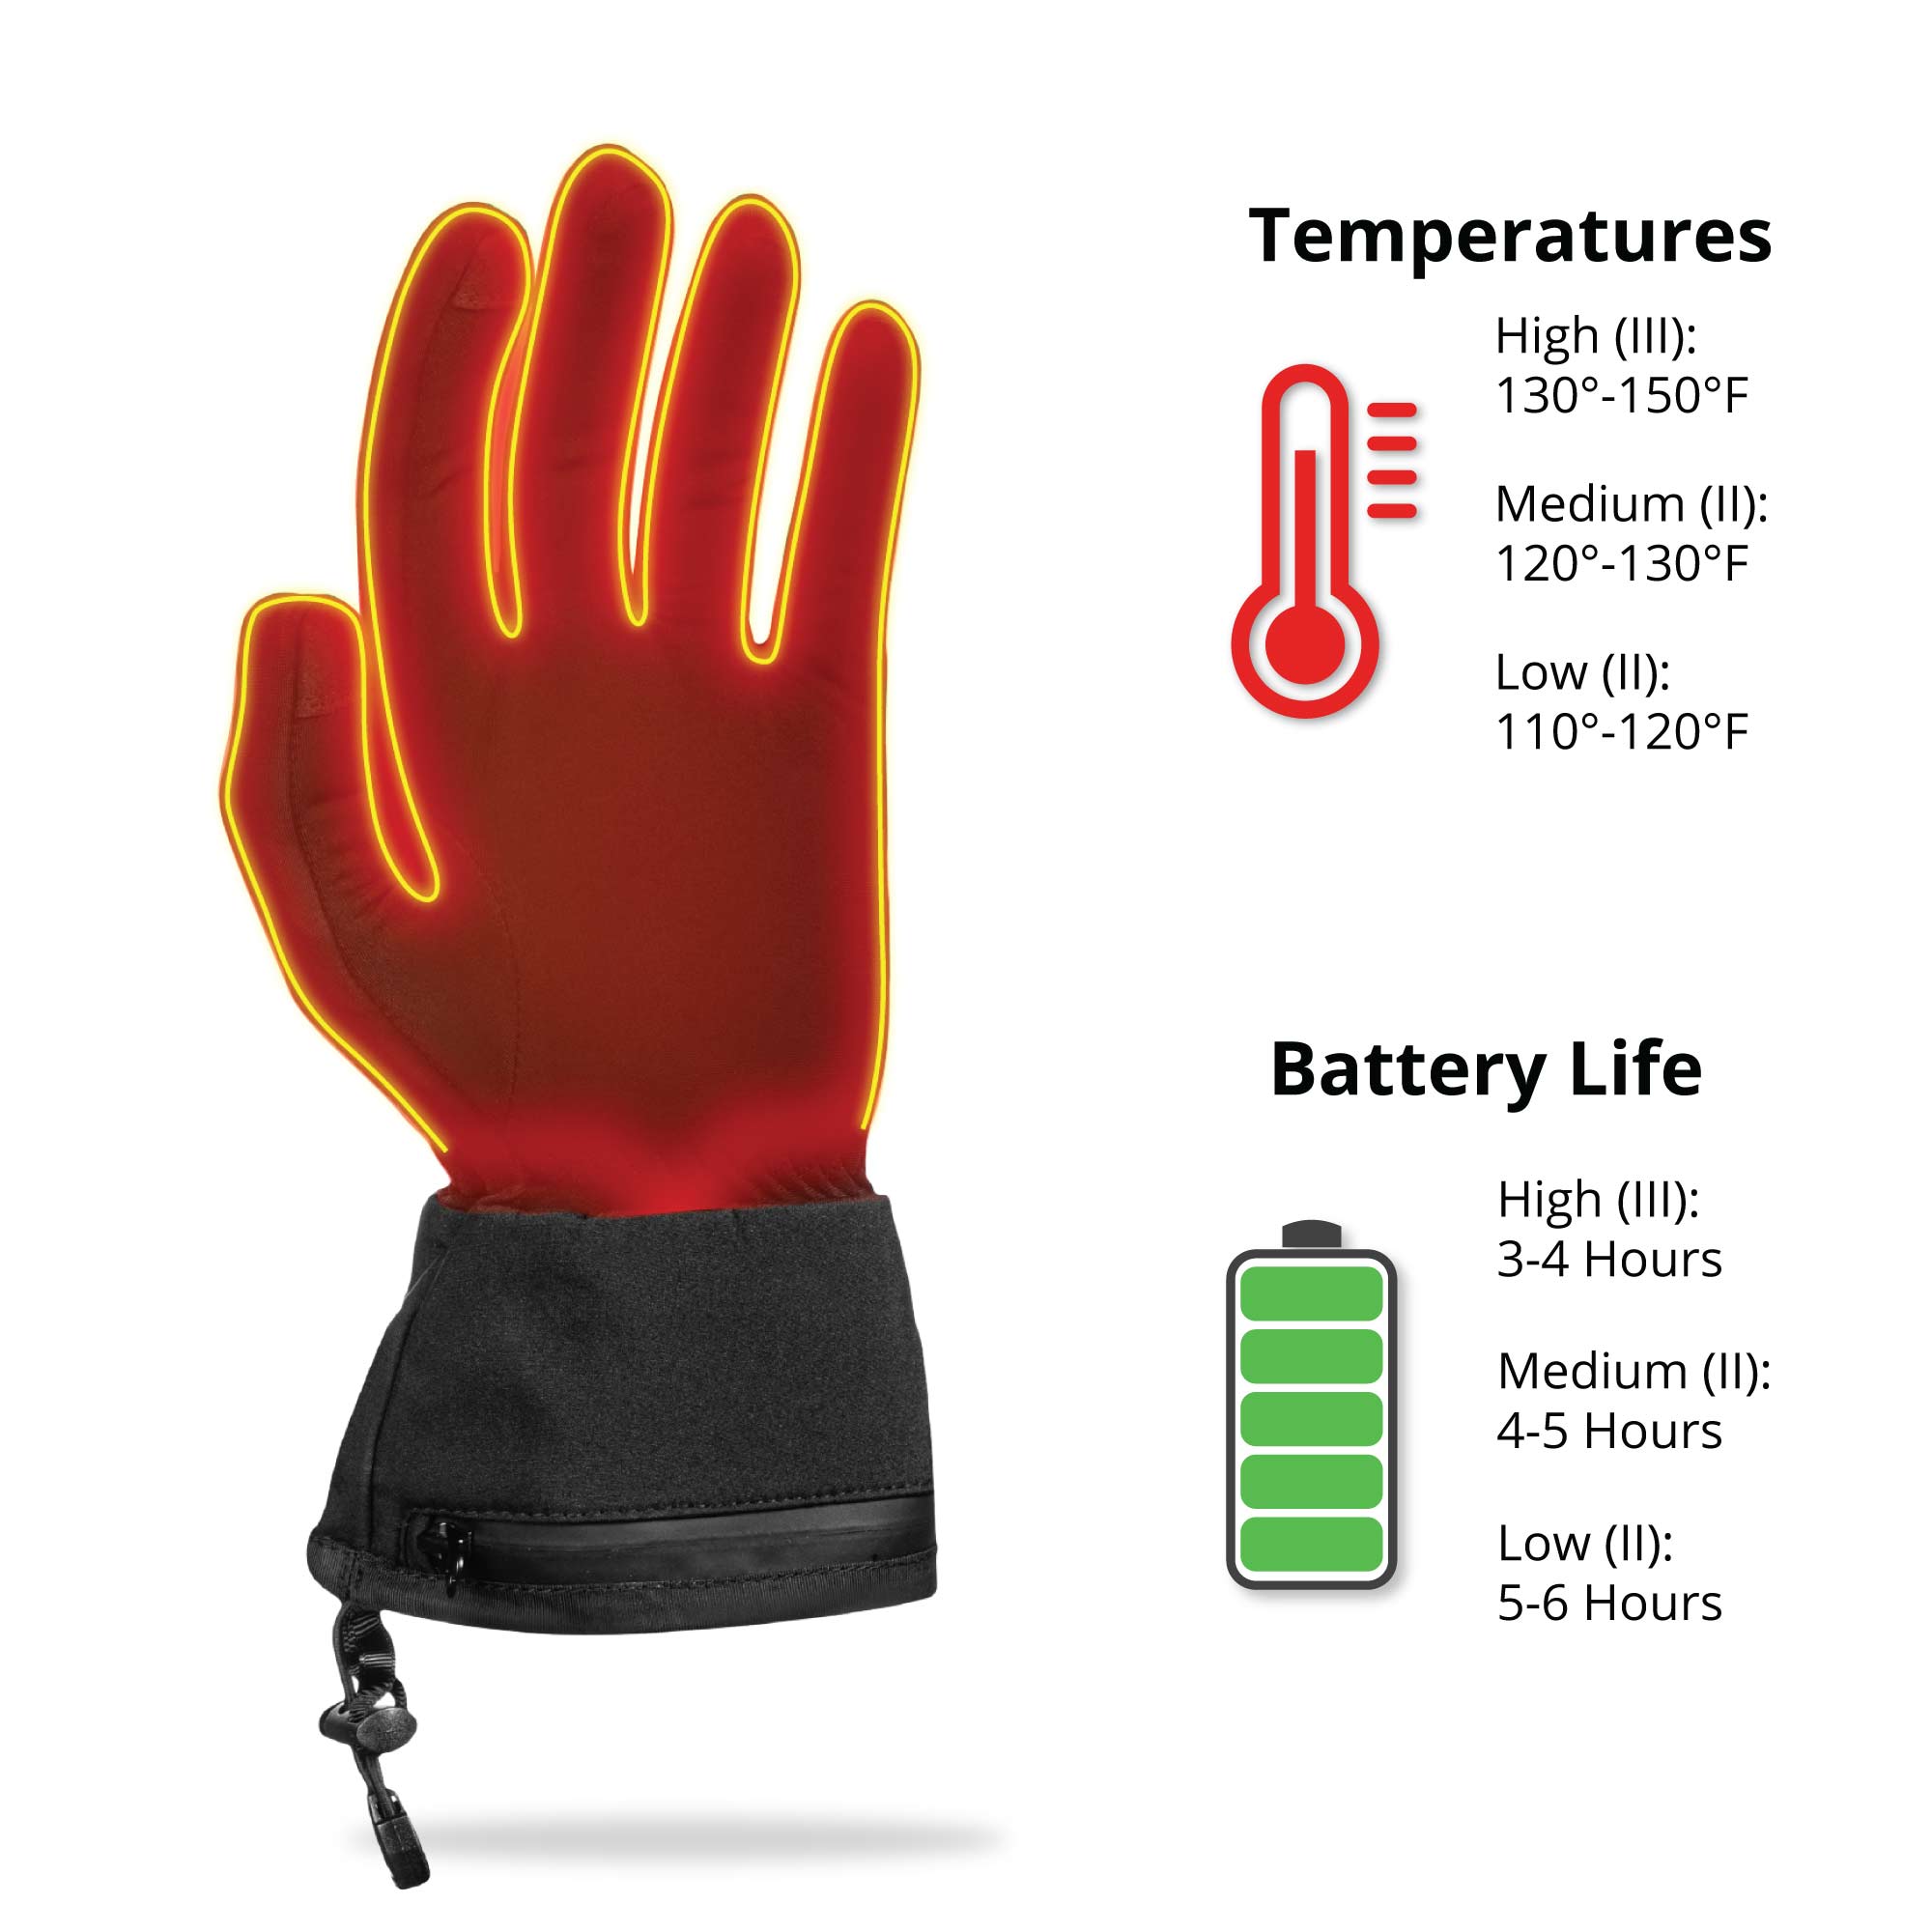 the all new heated glove by anseris heated clothing features heating elements that wrap around your entire hand with a focus on keeping your fingers warm.  easily adjust the temperature with 3 heat settings that reach temperatures up to 130 degrees